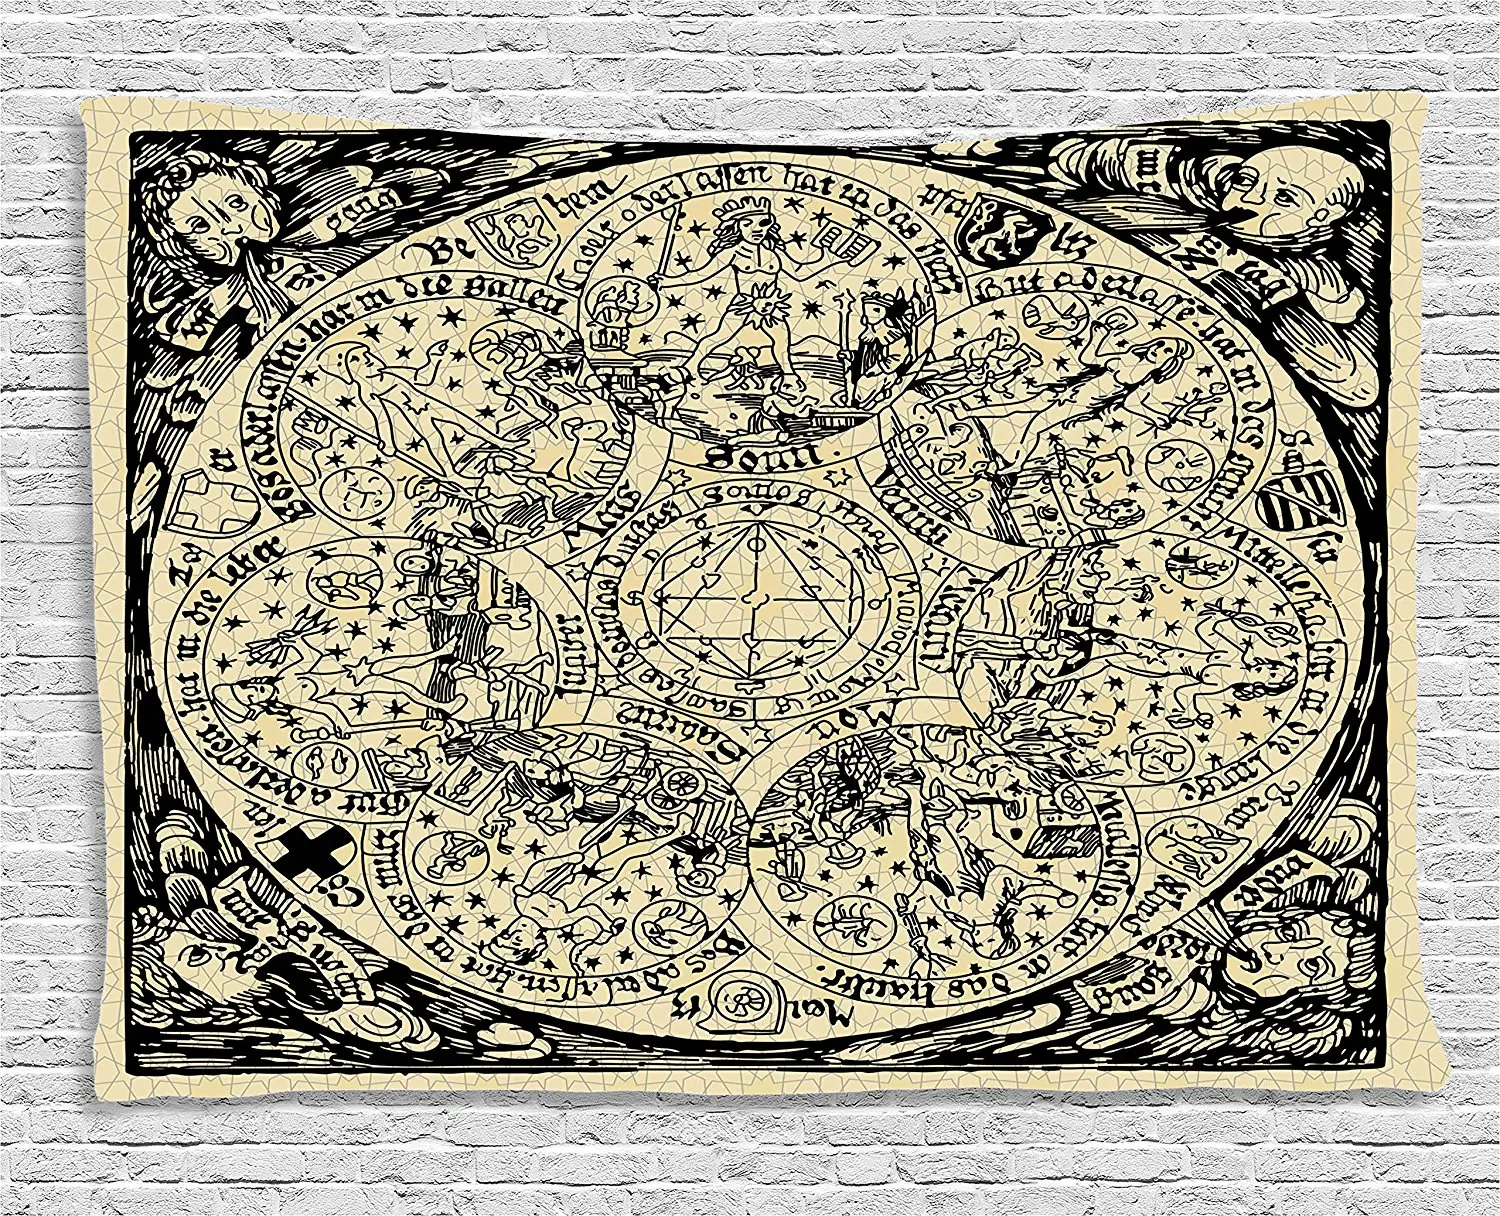 Astrology Tapestry Series of Ancient Mystic Esoteric Old Map with Man Figures Vintage Symbols Decor Wall Hanging for Dorm